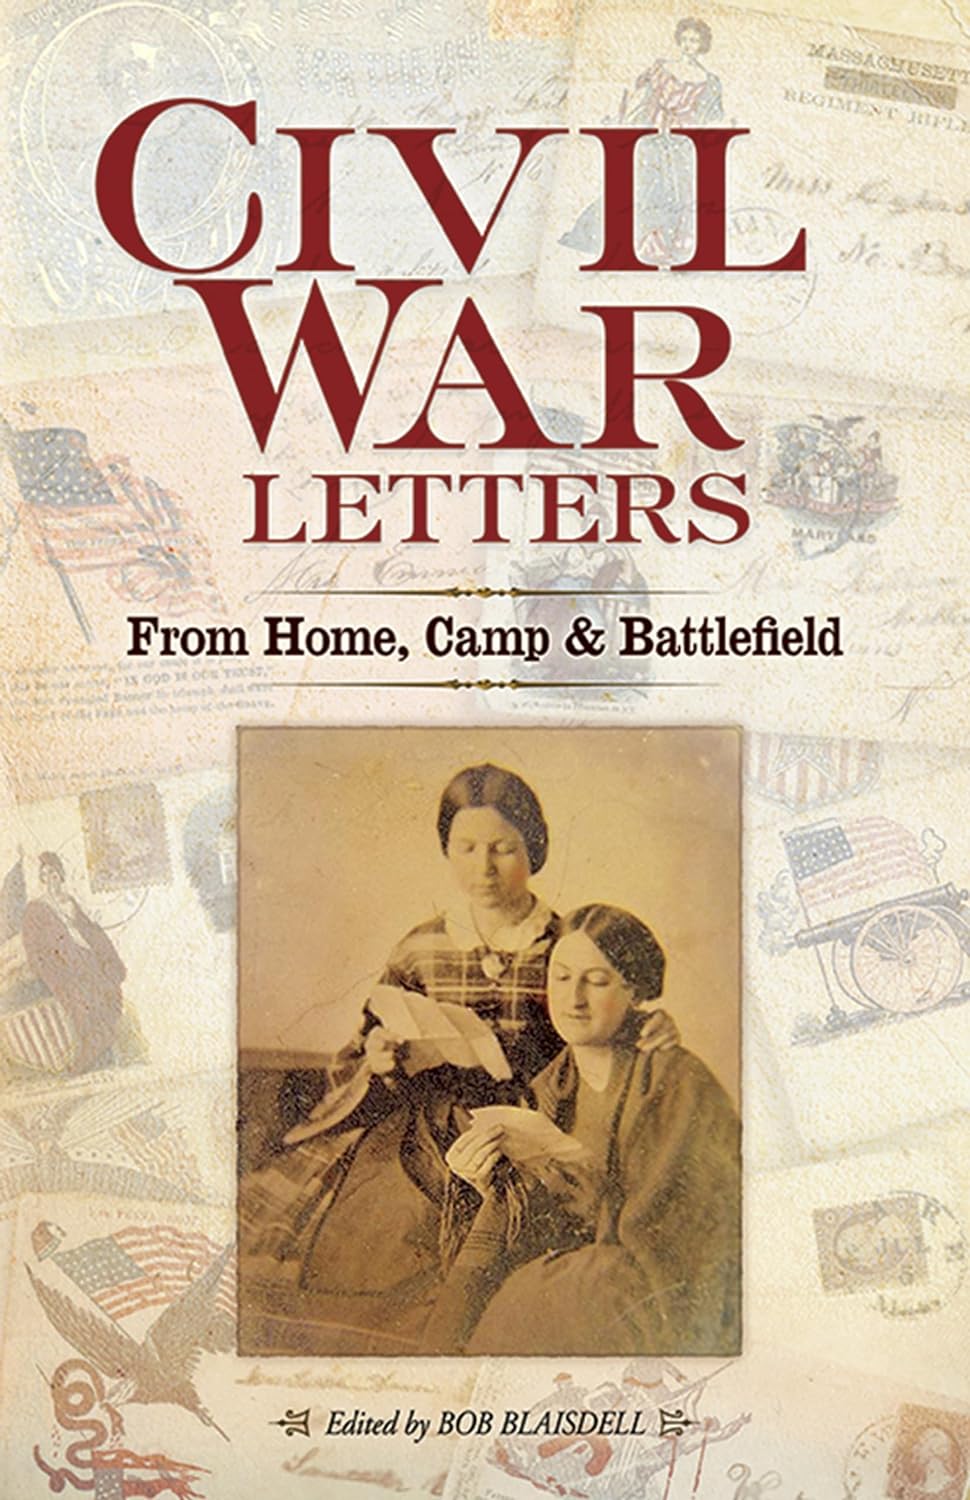 Civil War Letters: From Home, Camp & Battlefield